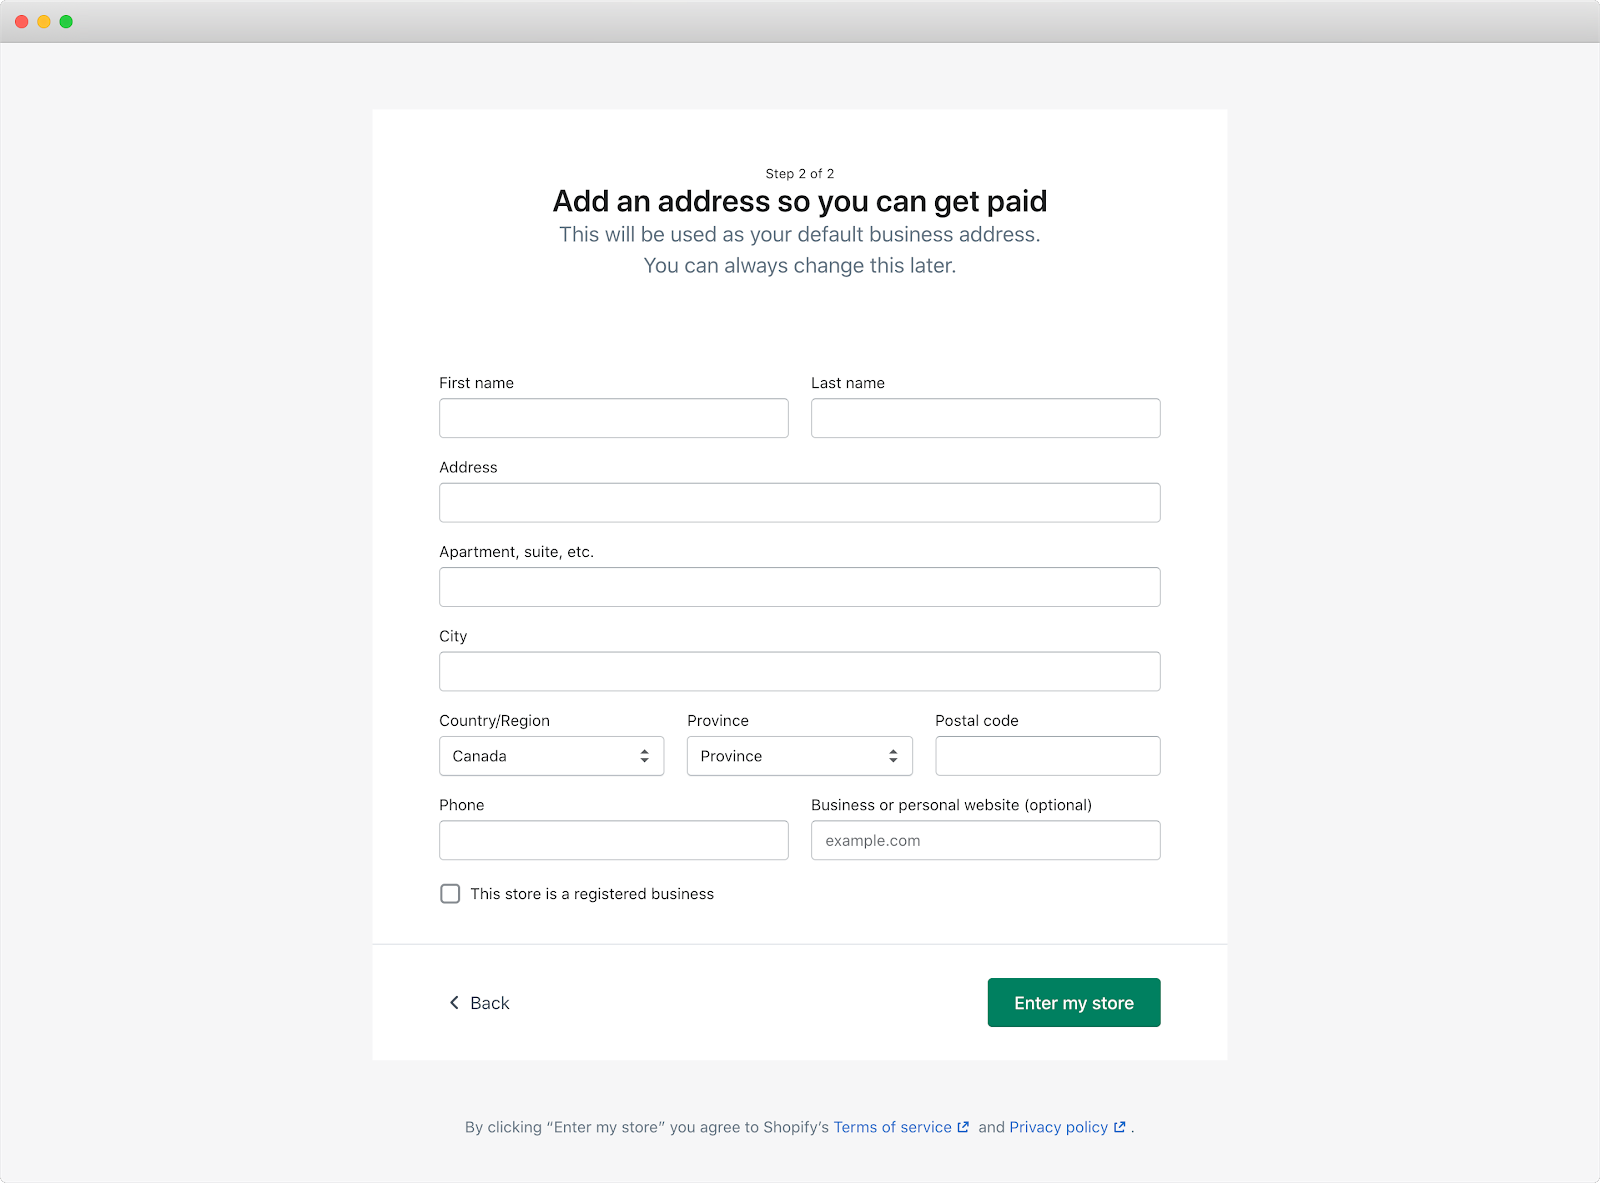 A screenshot showing Step 2 of Shopify's signup process